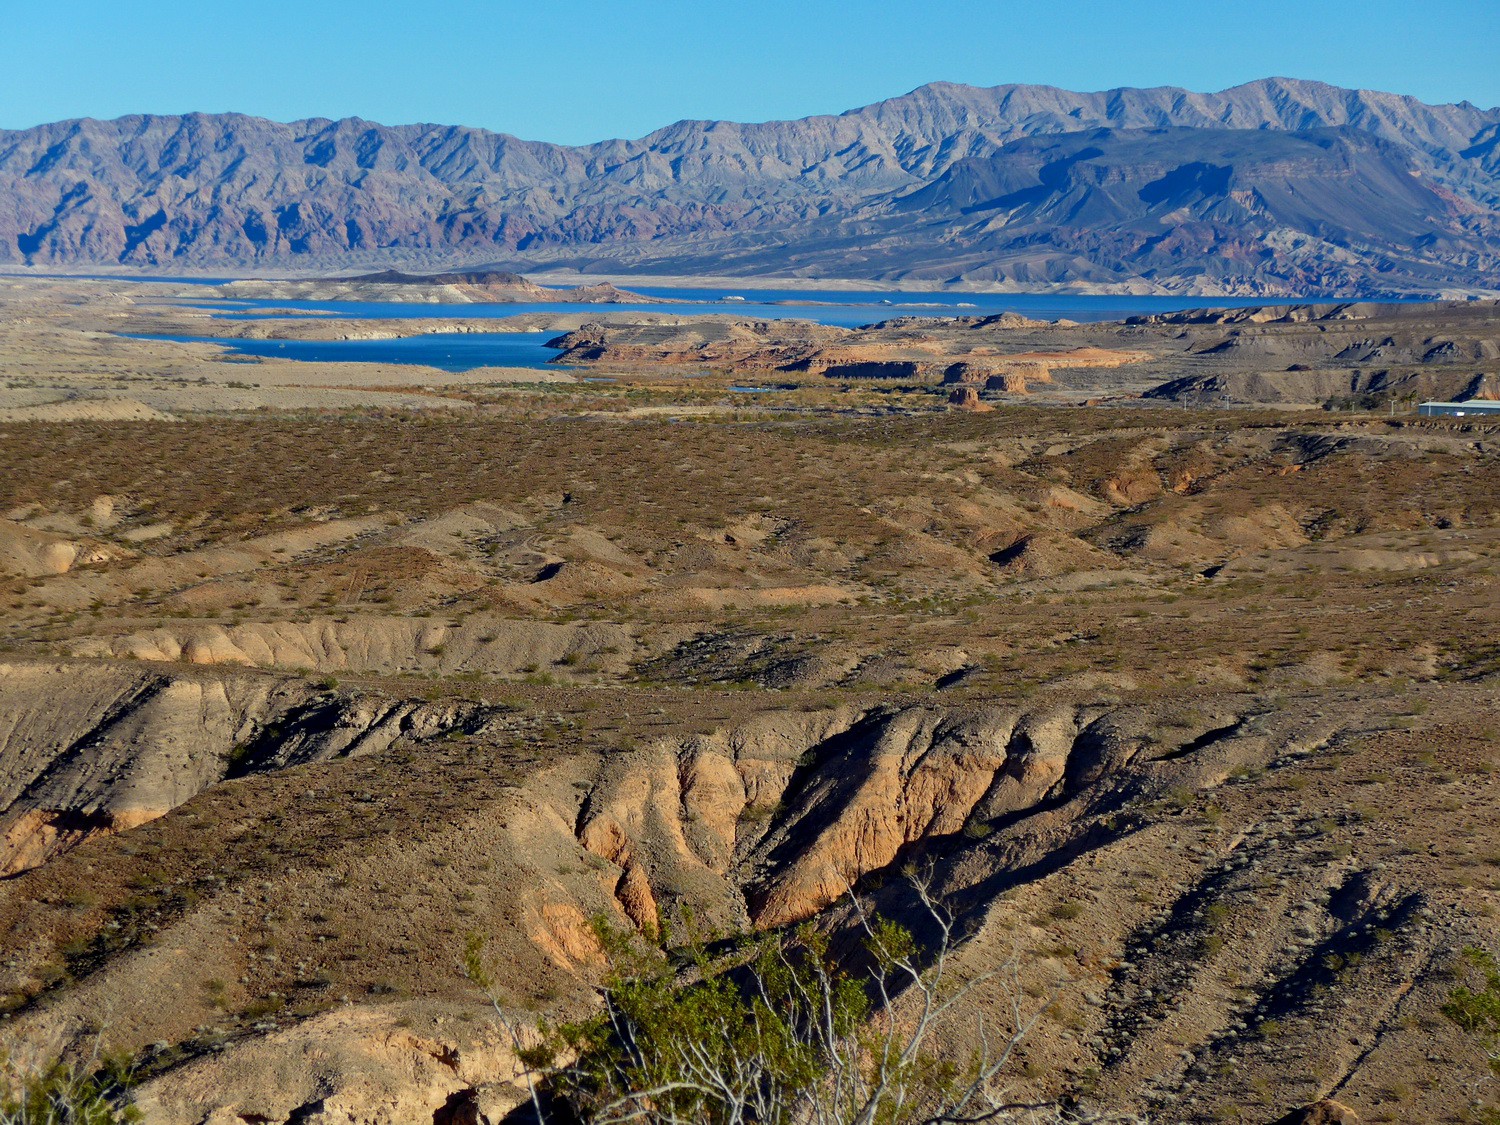 Lake Mead seen from the trail "The Bluffs"